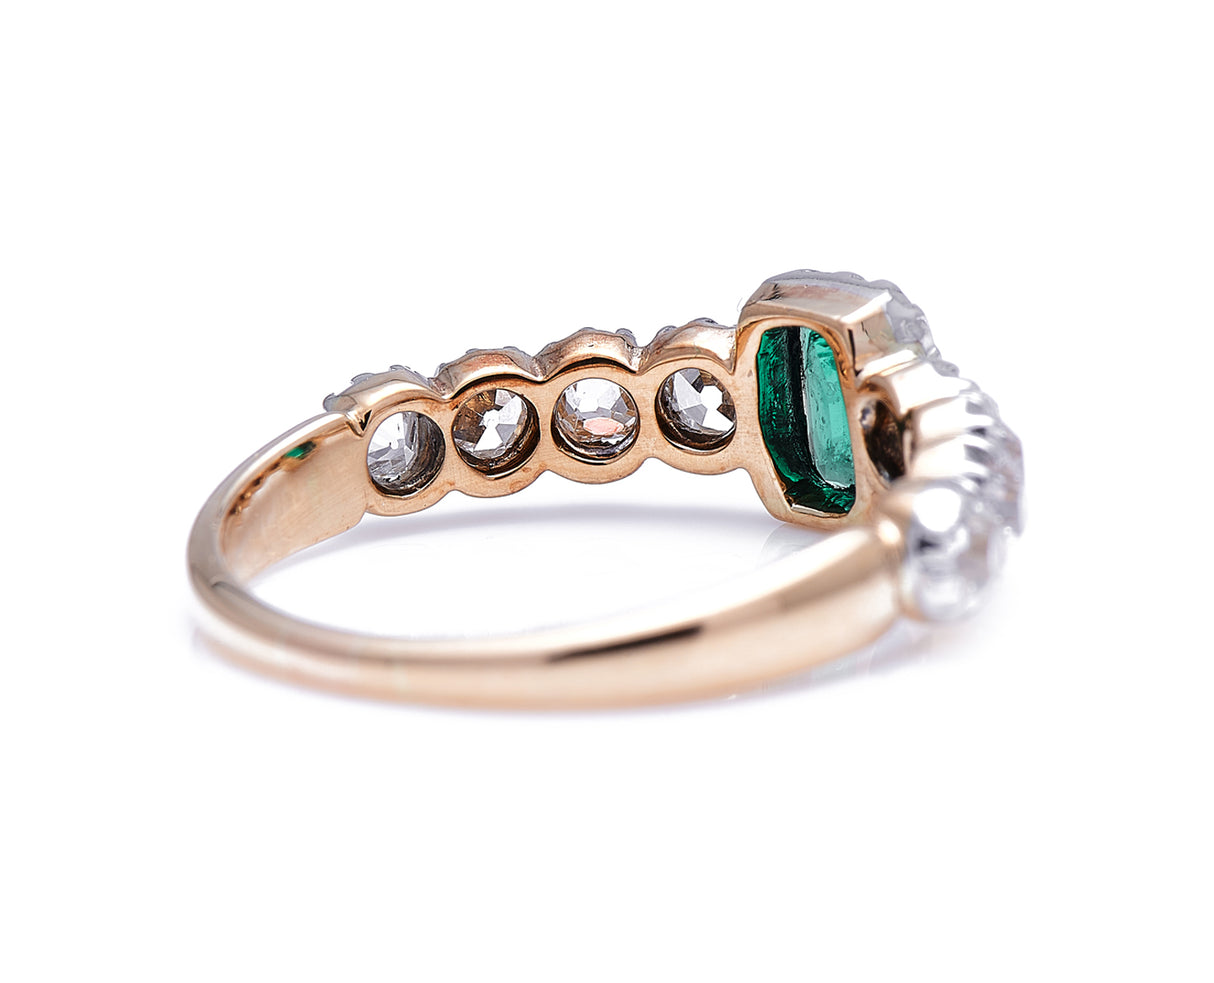 Early Victorian, 18ct Gold, Silver, Emerald and Diamond Ring